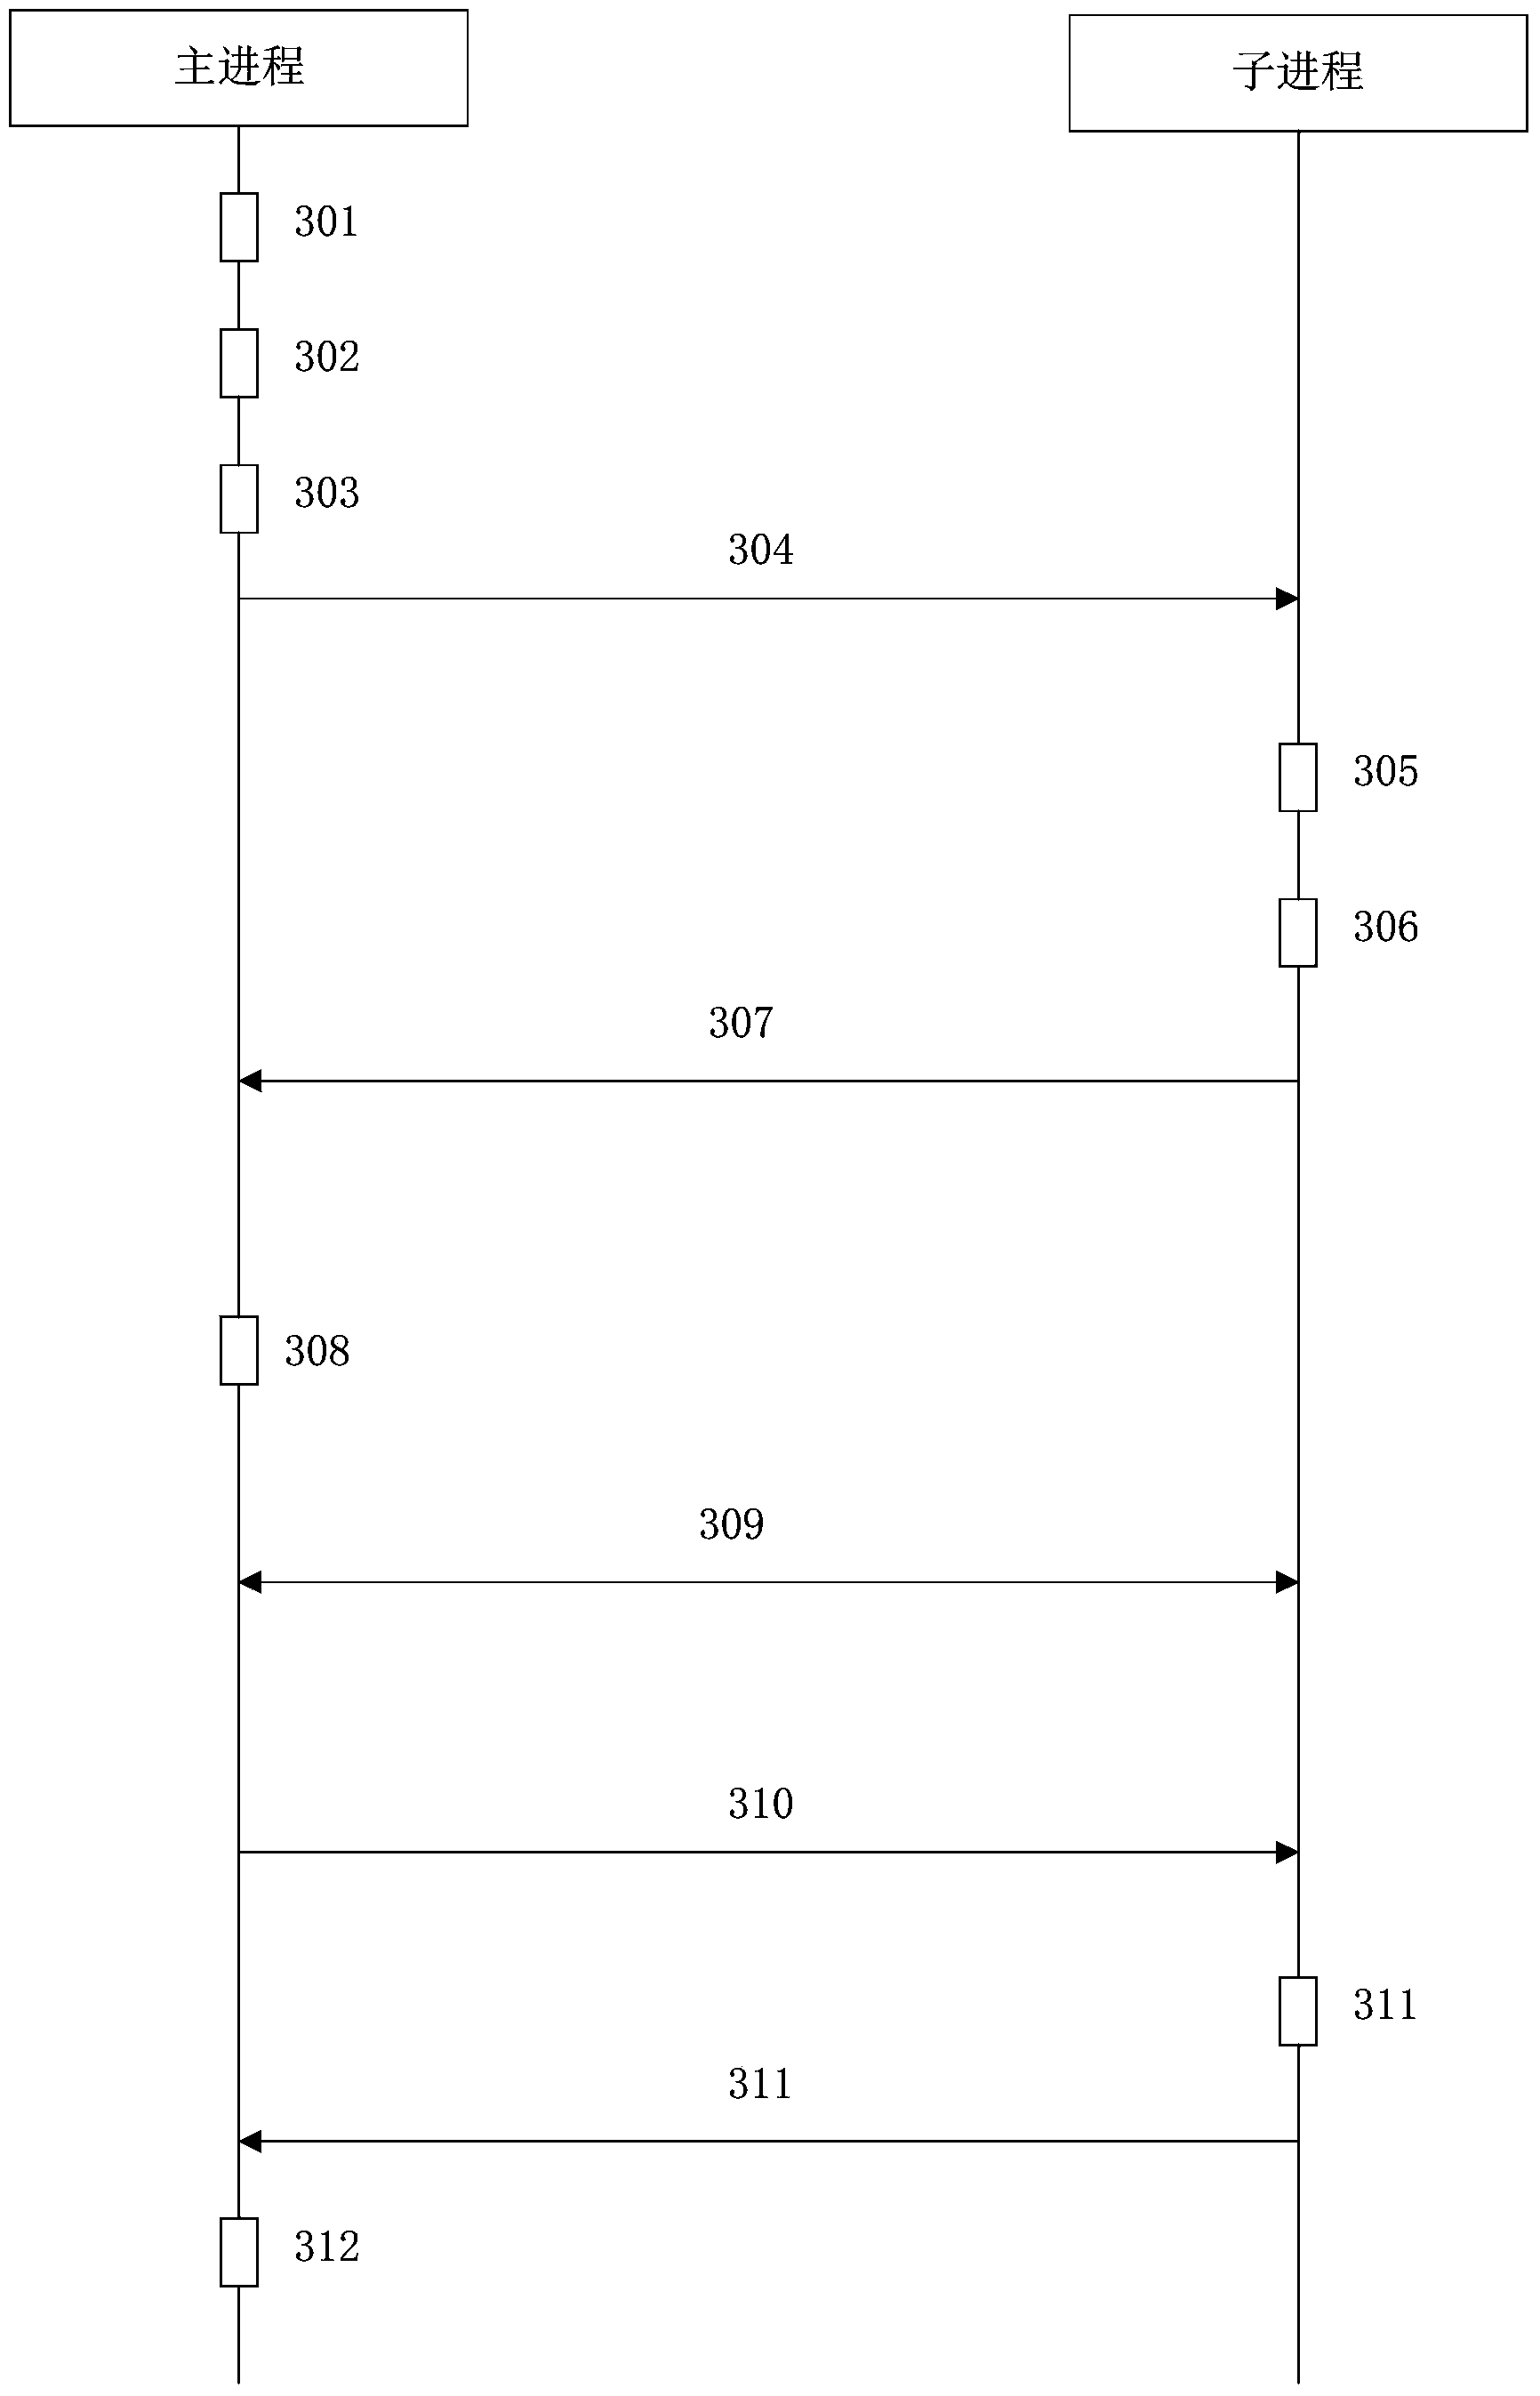 Inter-process communication method and device